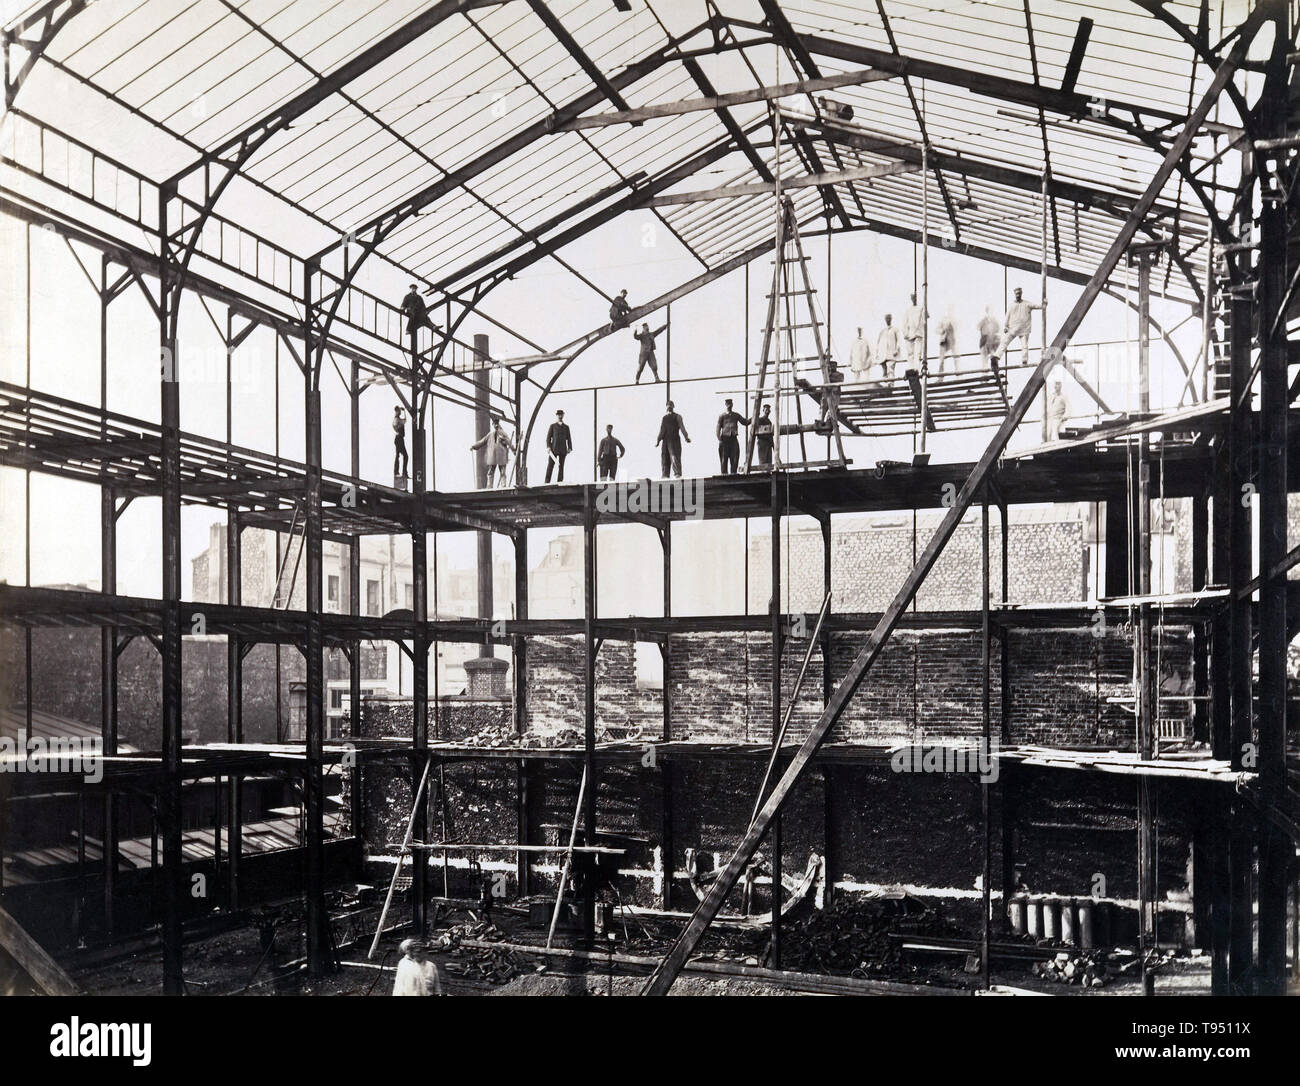 Construction site taken by French photographer Louis Lafon in the 1880s. The urbanization projects of nineteenth-century France called on photography to record all stages of construction. This building's framework integrated modern techniques of iron and steel-frame construction with traditional materials like brick masonry. Stock Photo